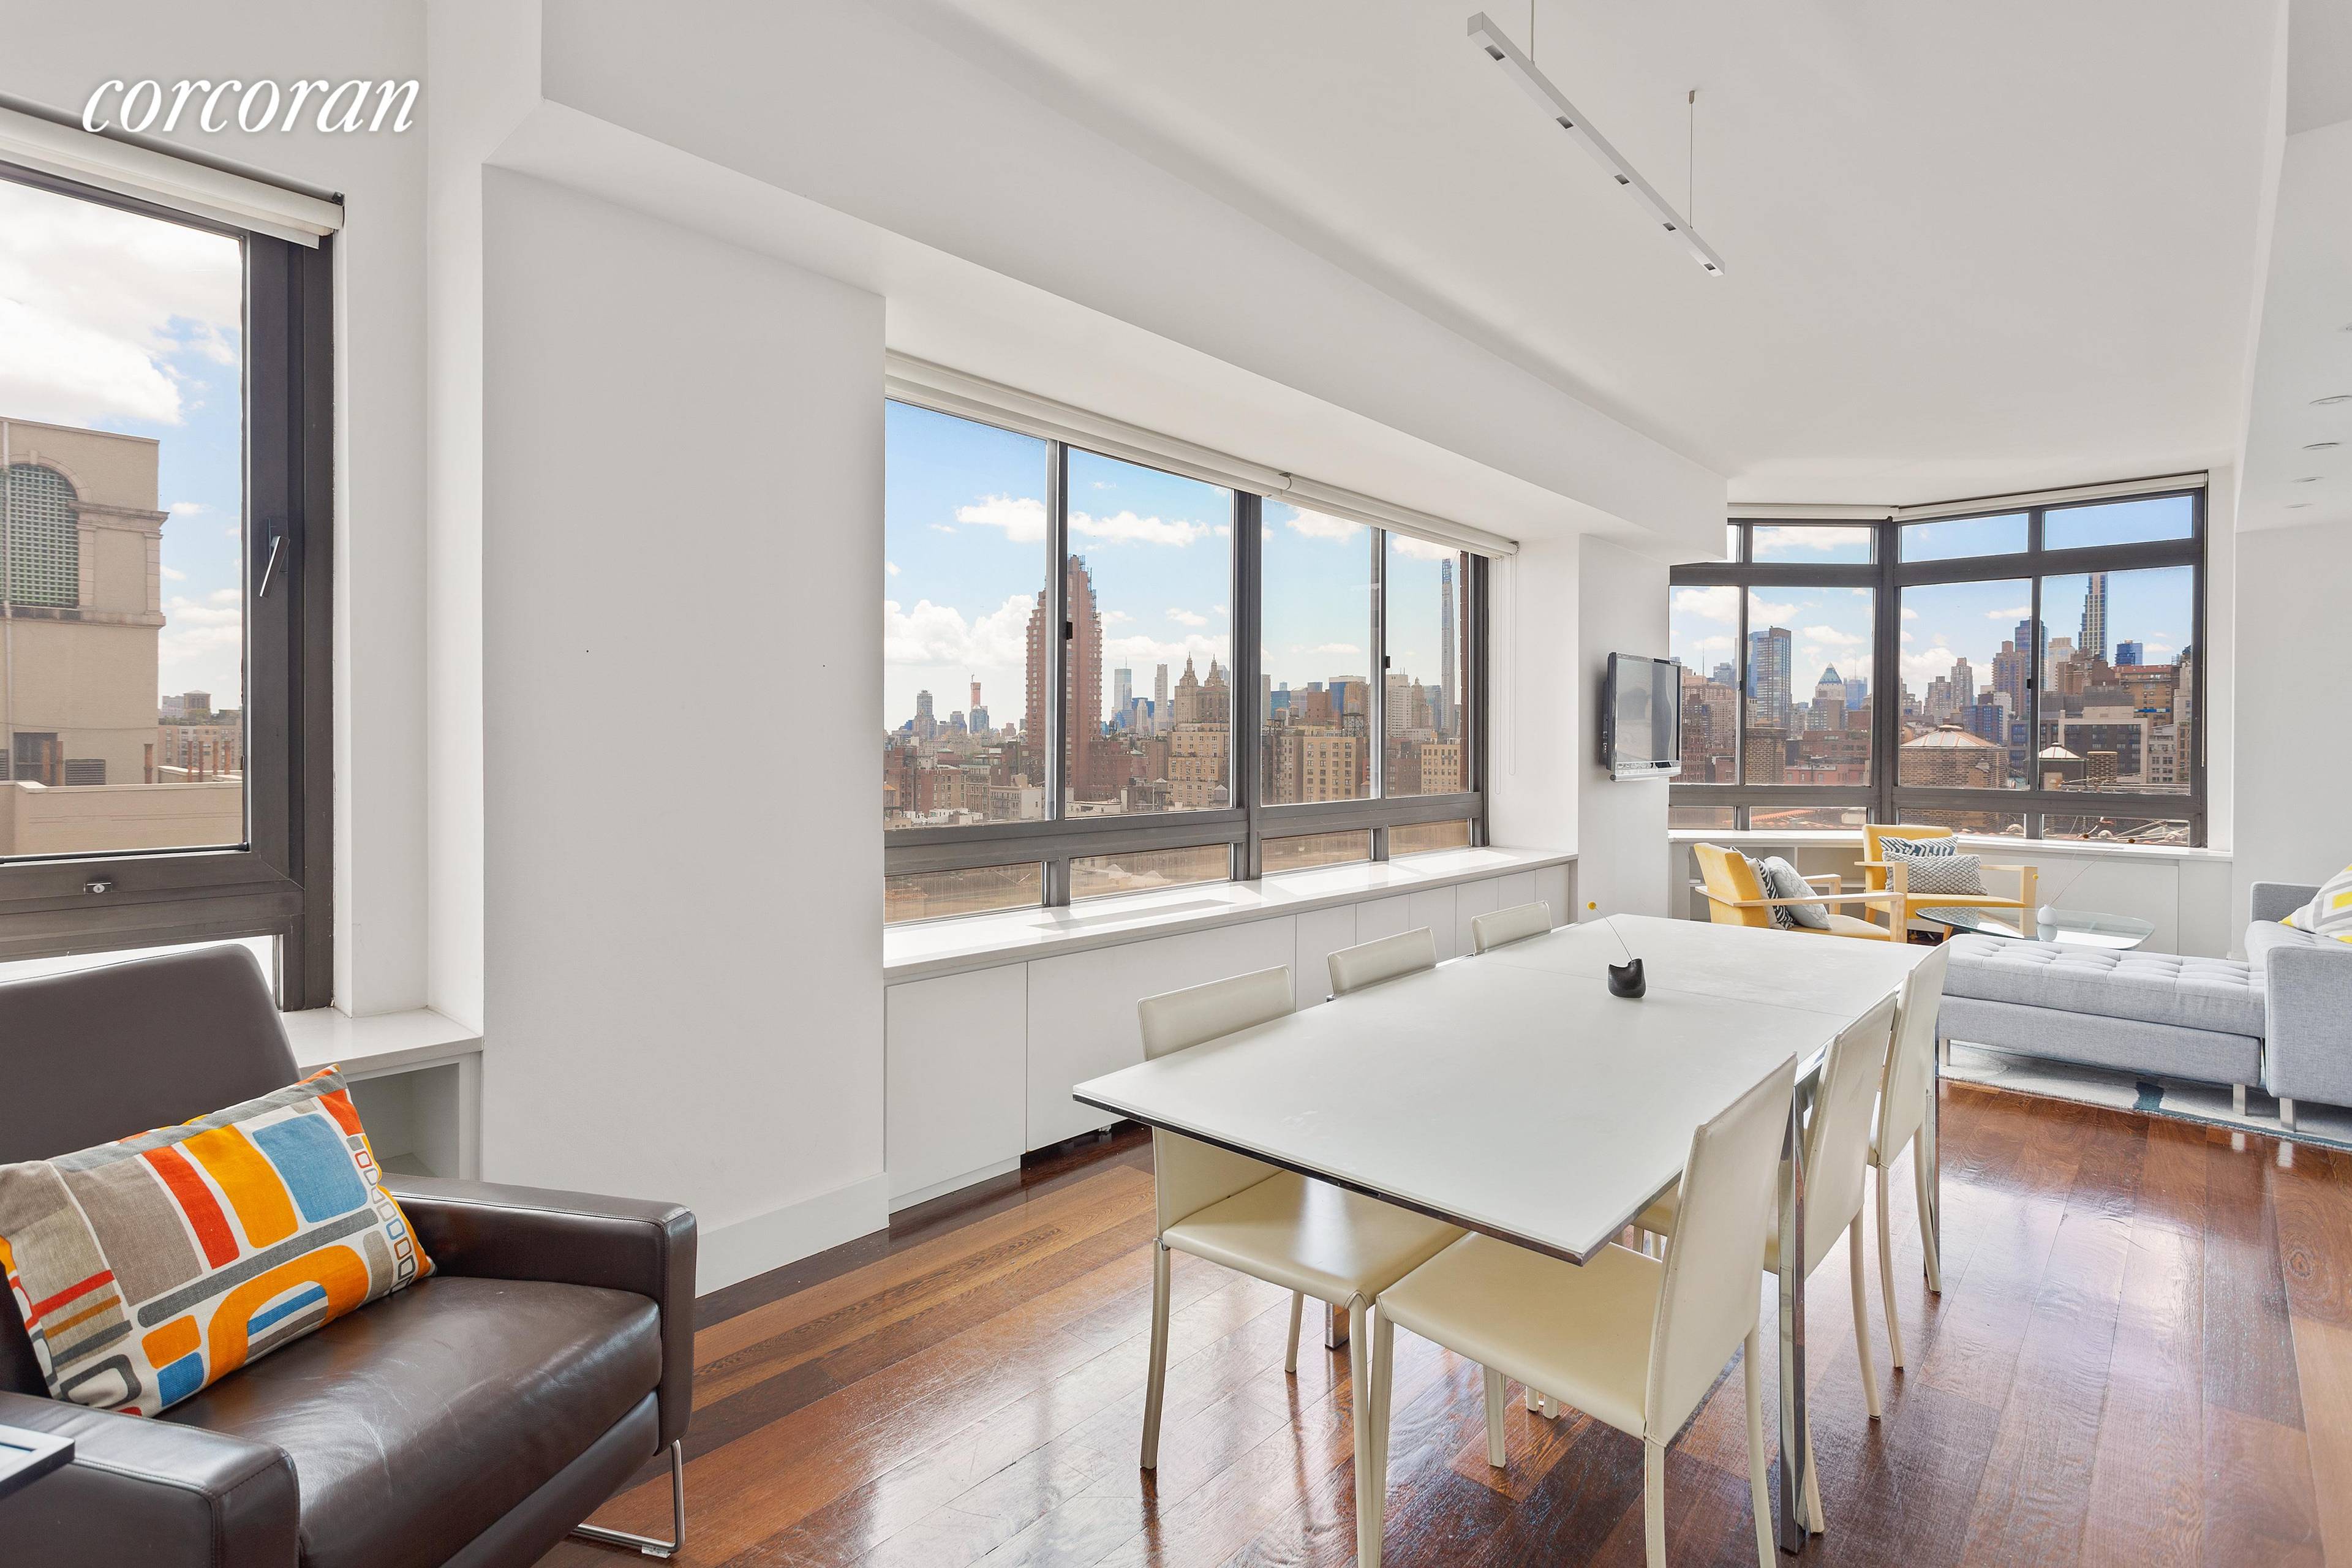 This stunning 18th floor apartment in the heart of the Upper West Side is available for rent starting August 1st.